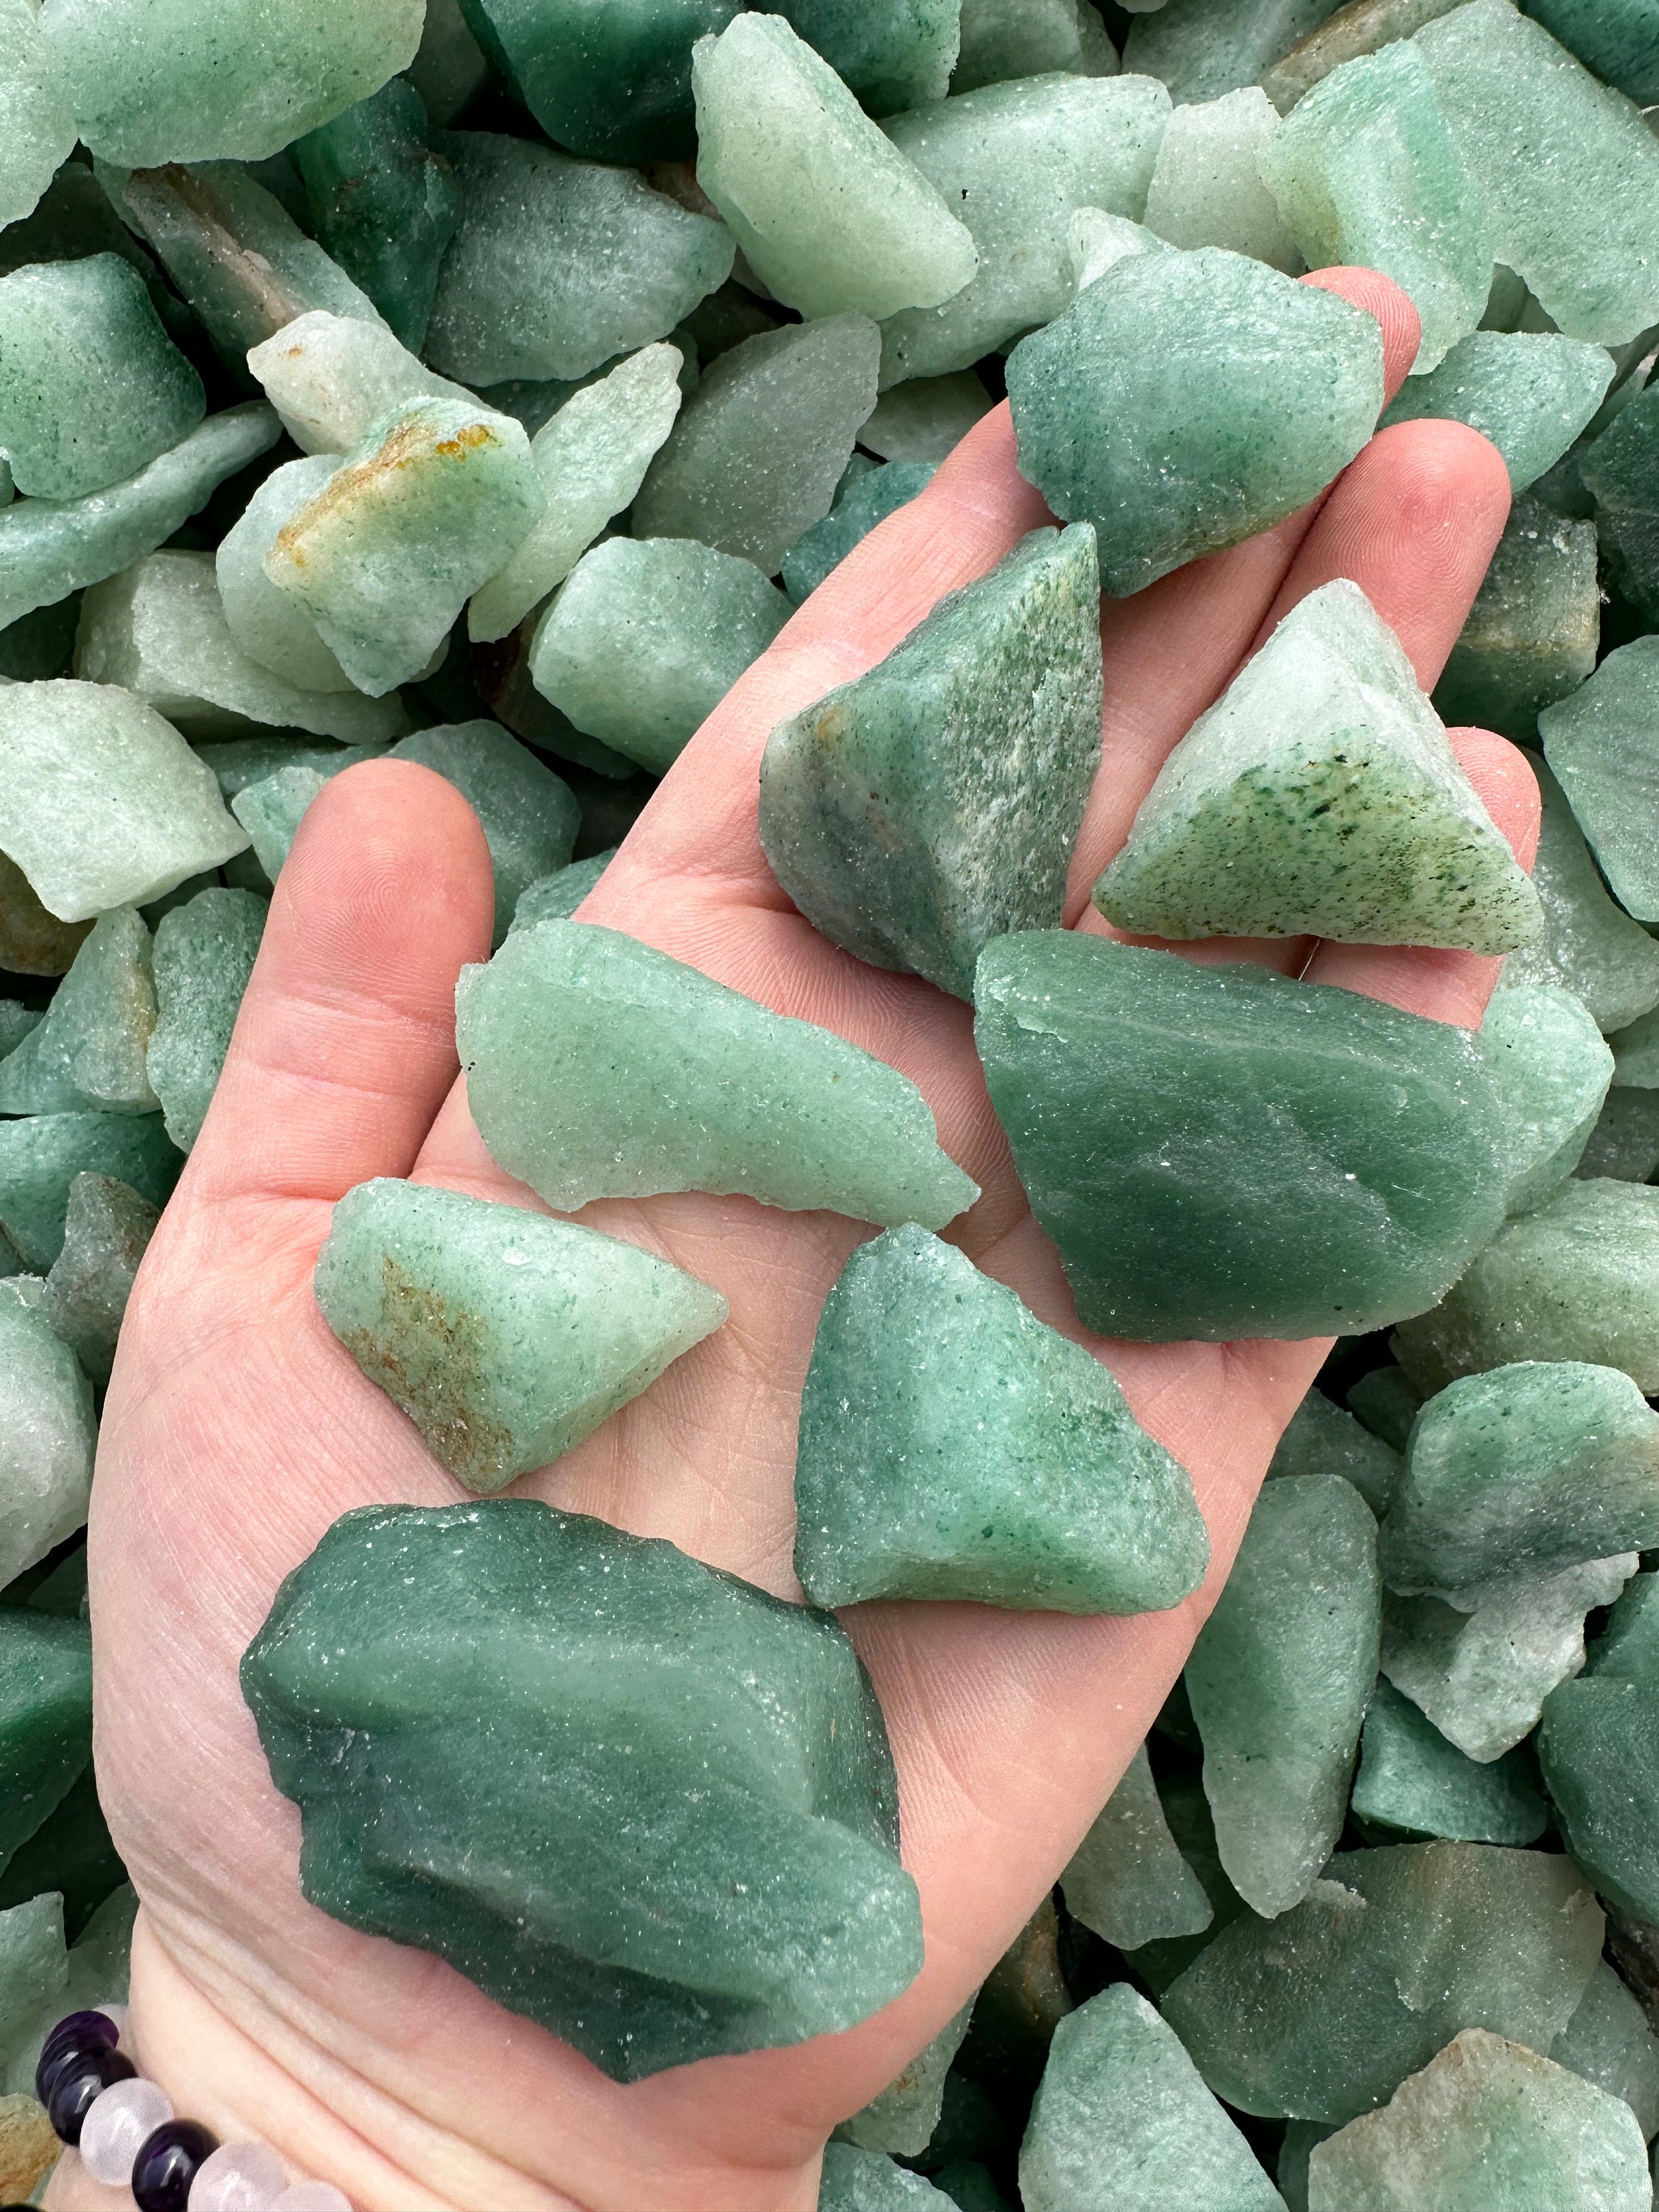 Green Aventurine Rough Rocks for Tumbling - Raw Crystals from Brazil – ROCK  AND TUMBLE